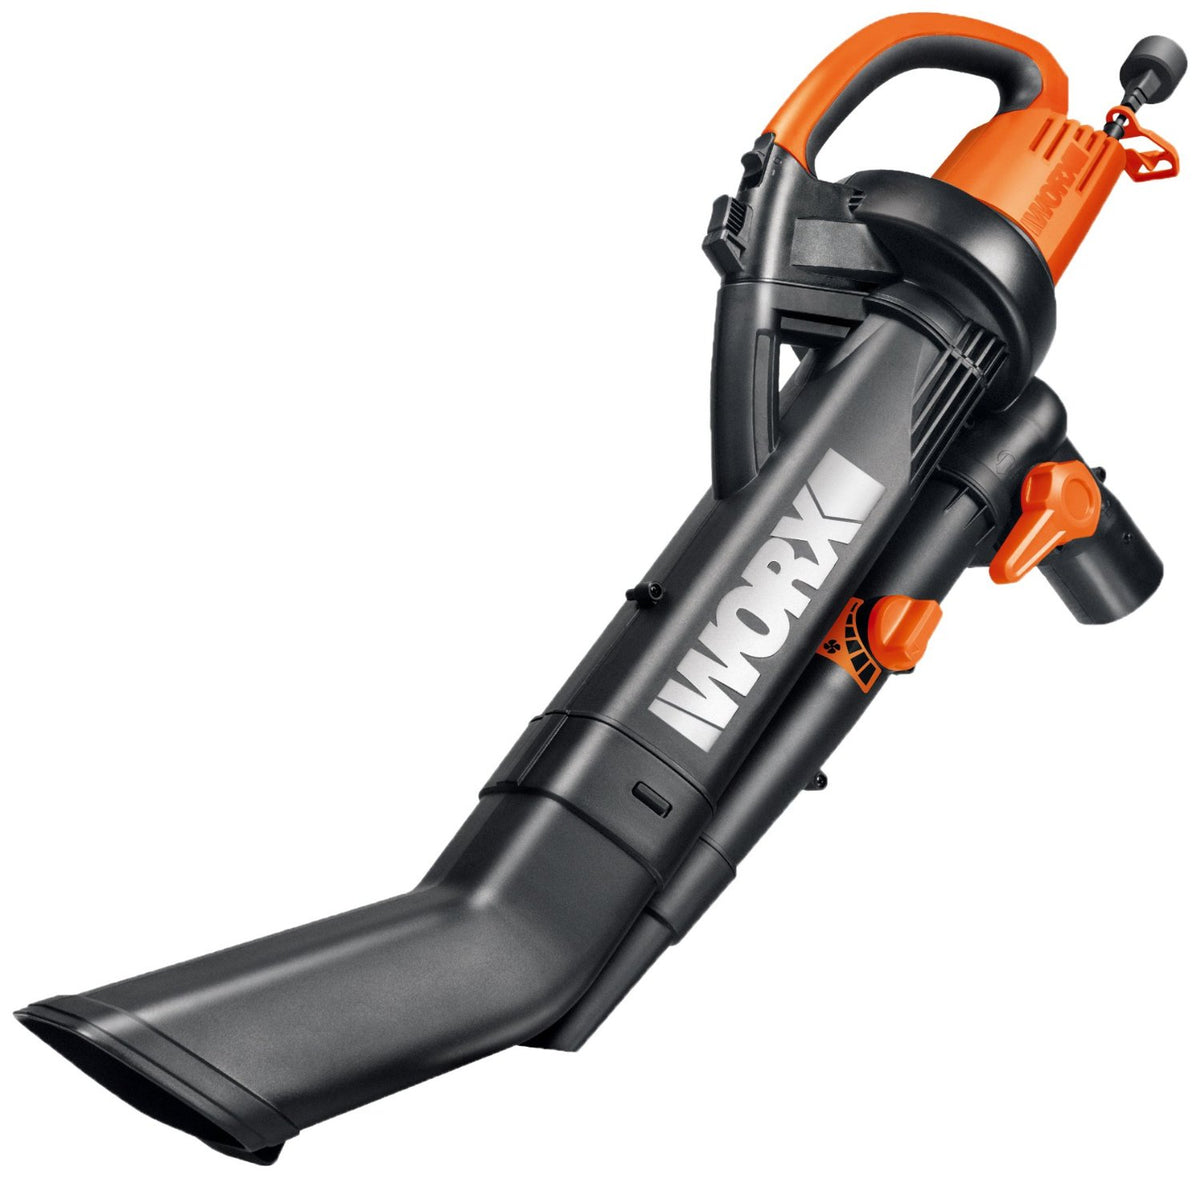 Worx WG505 Electric Trivac Blower With Metal Impeller, 12 Amp